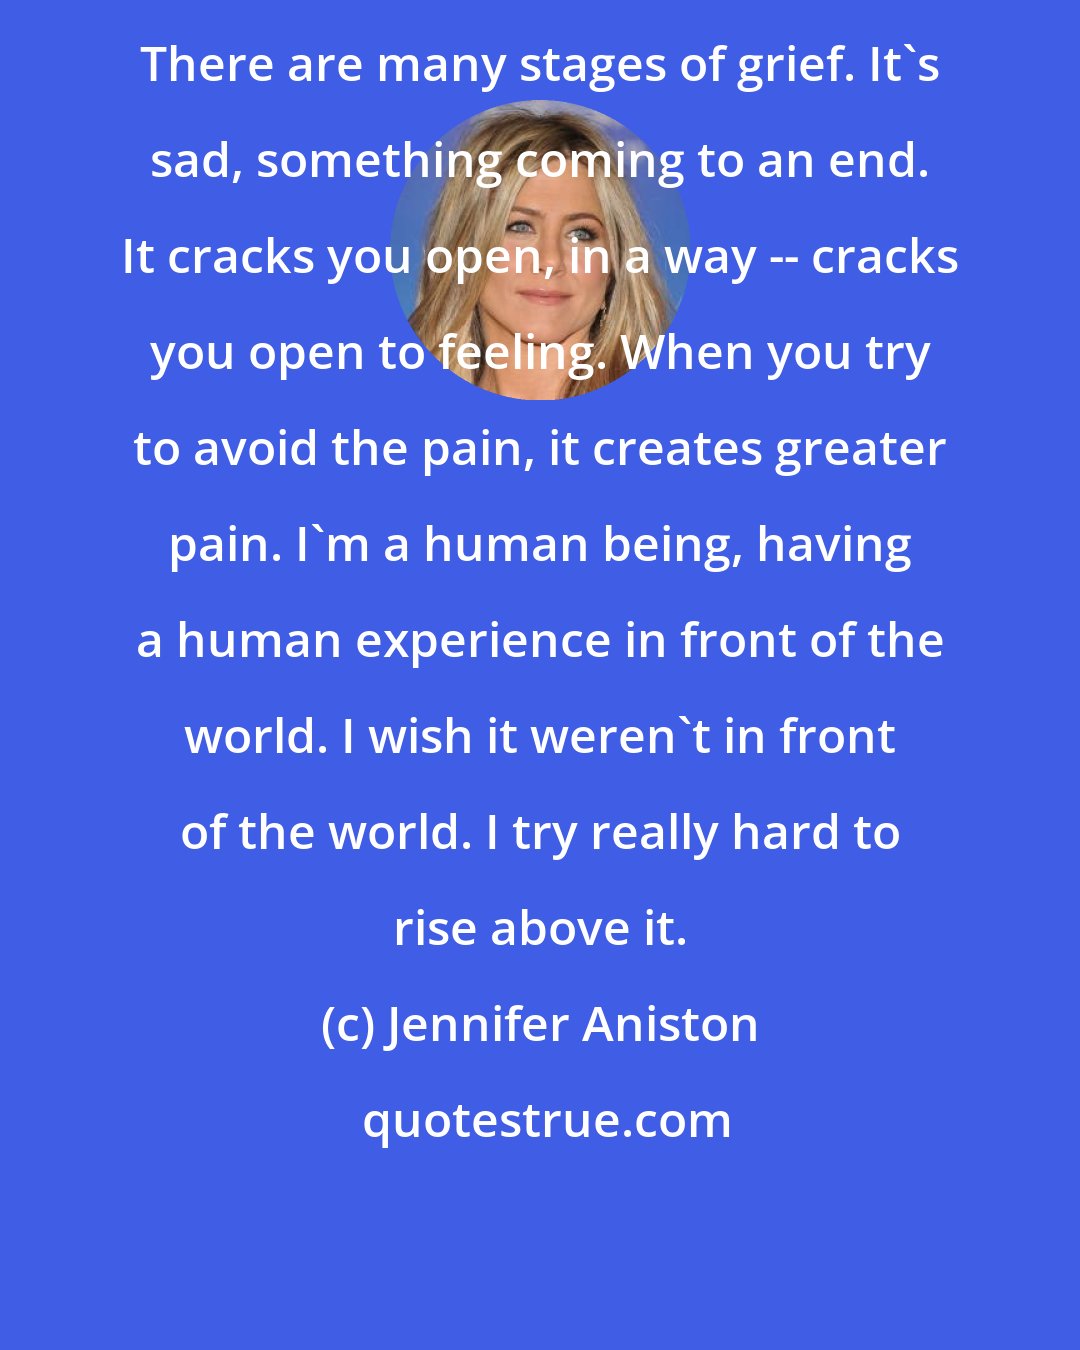 Jennifer Aniston: There are many stages of grief. It's sad, something coming to an end. It cracks you open, in a way -- cracks you open to feeling. When you try to avoid the pain, it creates greater pain. I'm a human being, having a human experience in front of the world. I wish it weren't in front of the world. I try really hard to rise above it.